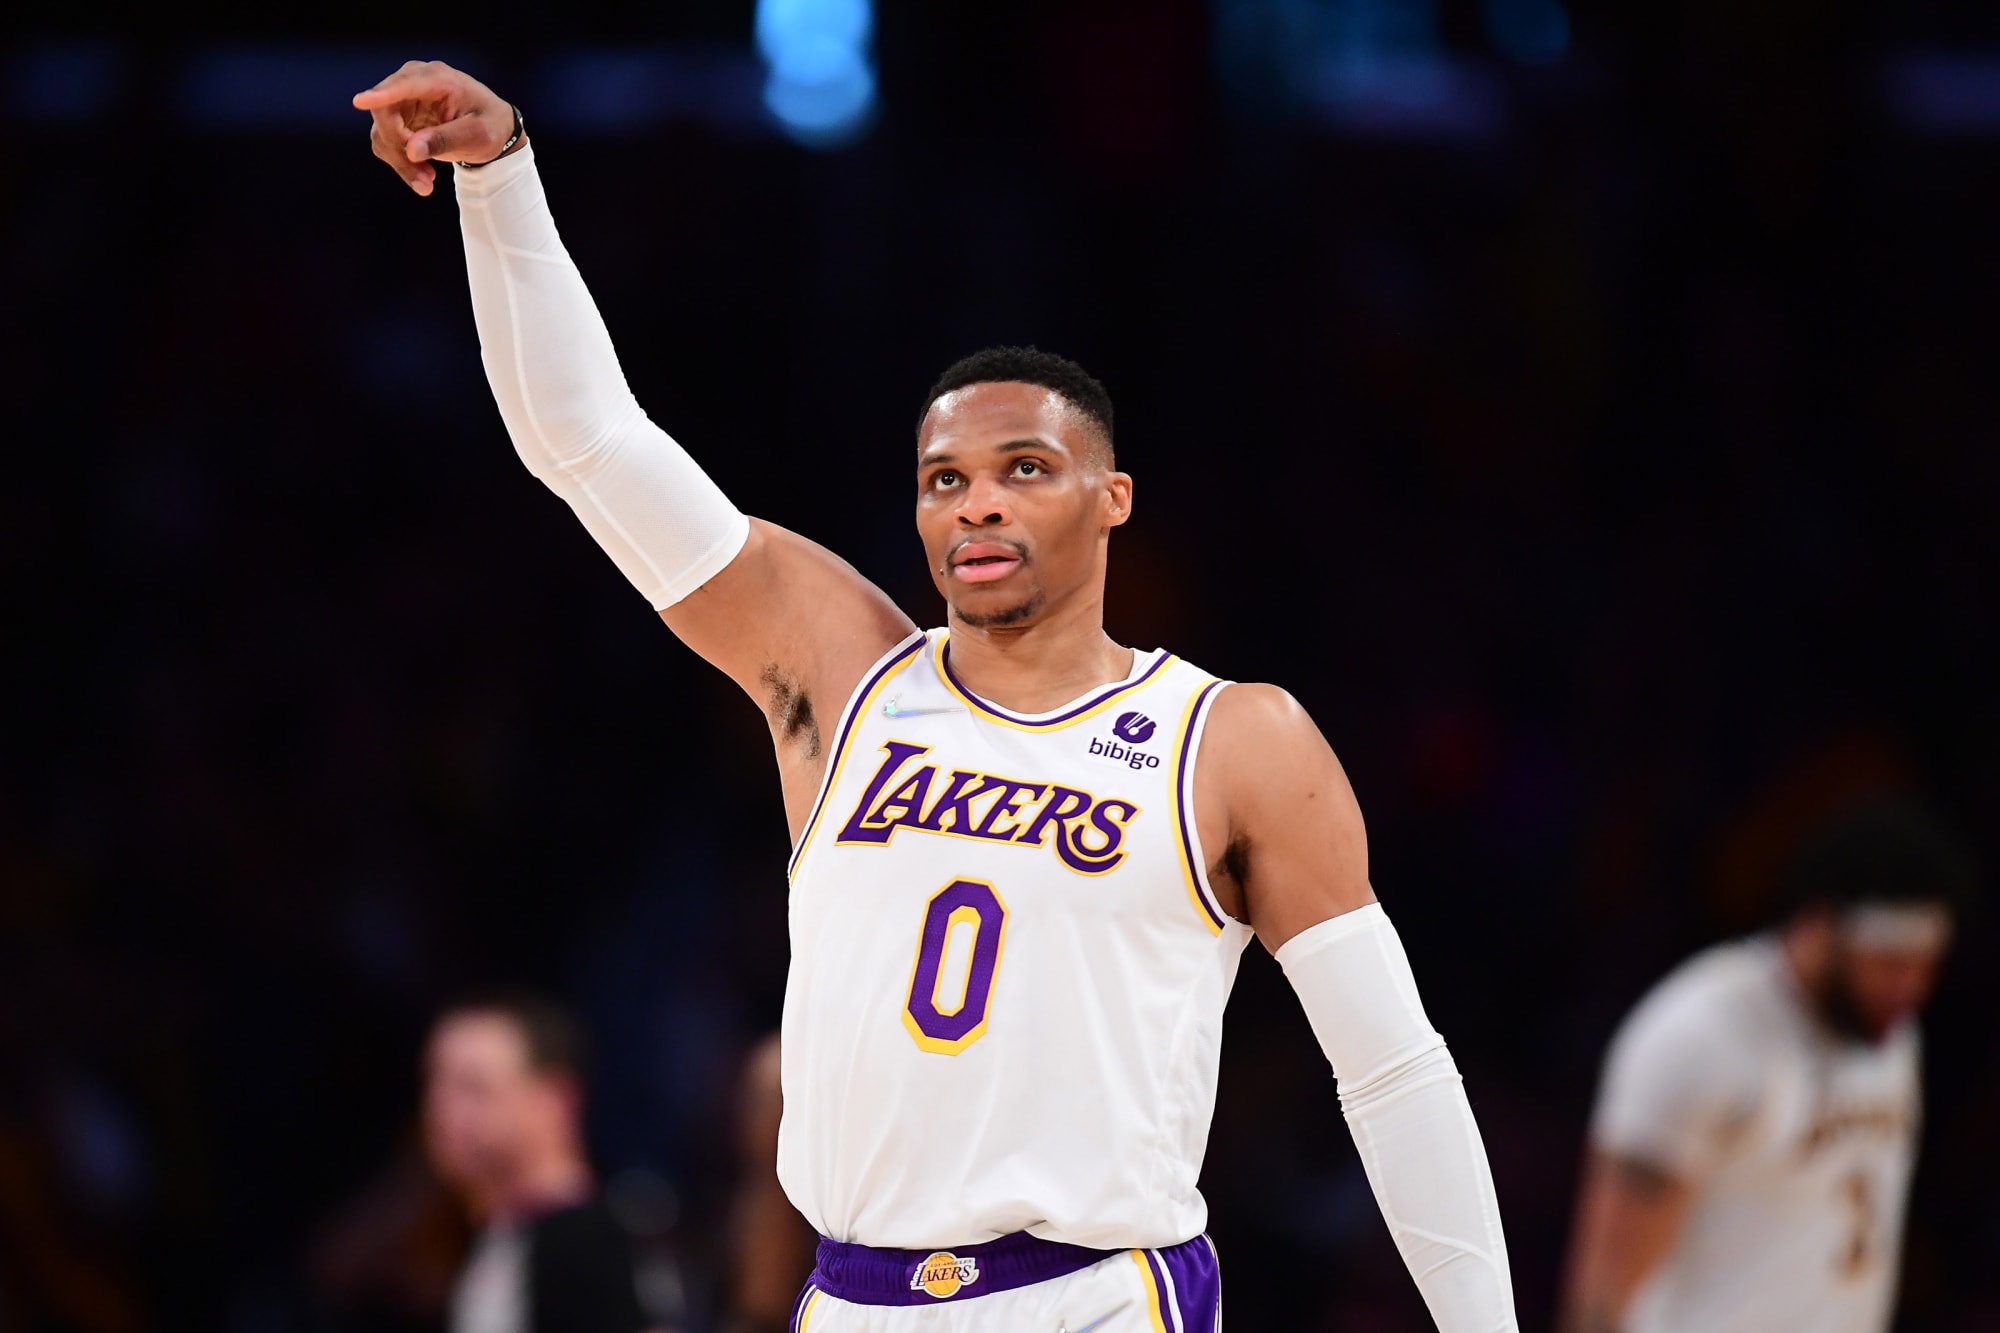 Lakers’ Russell Westbrook is in a league of his own in this statistic